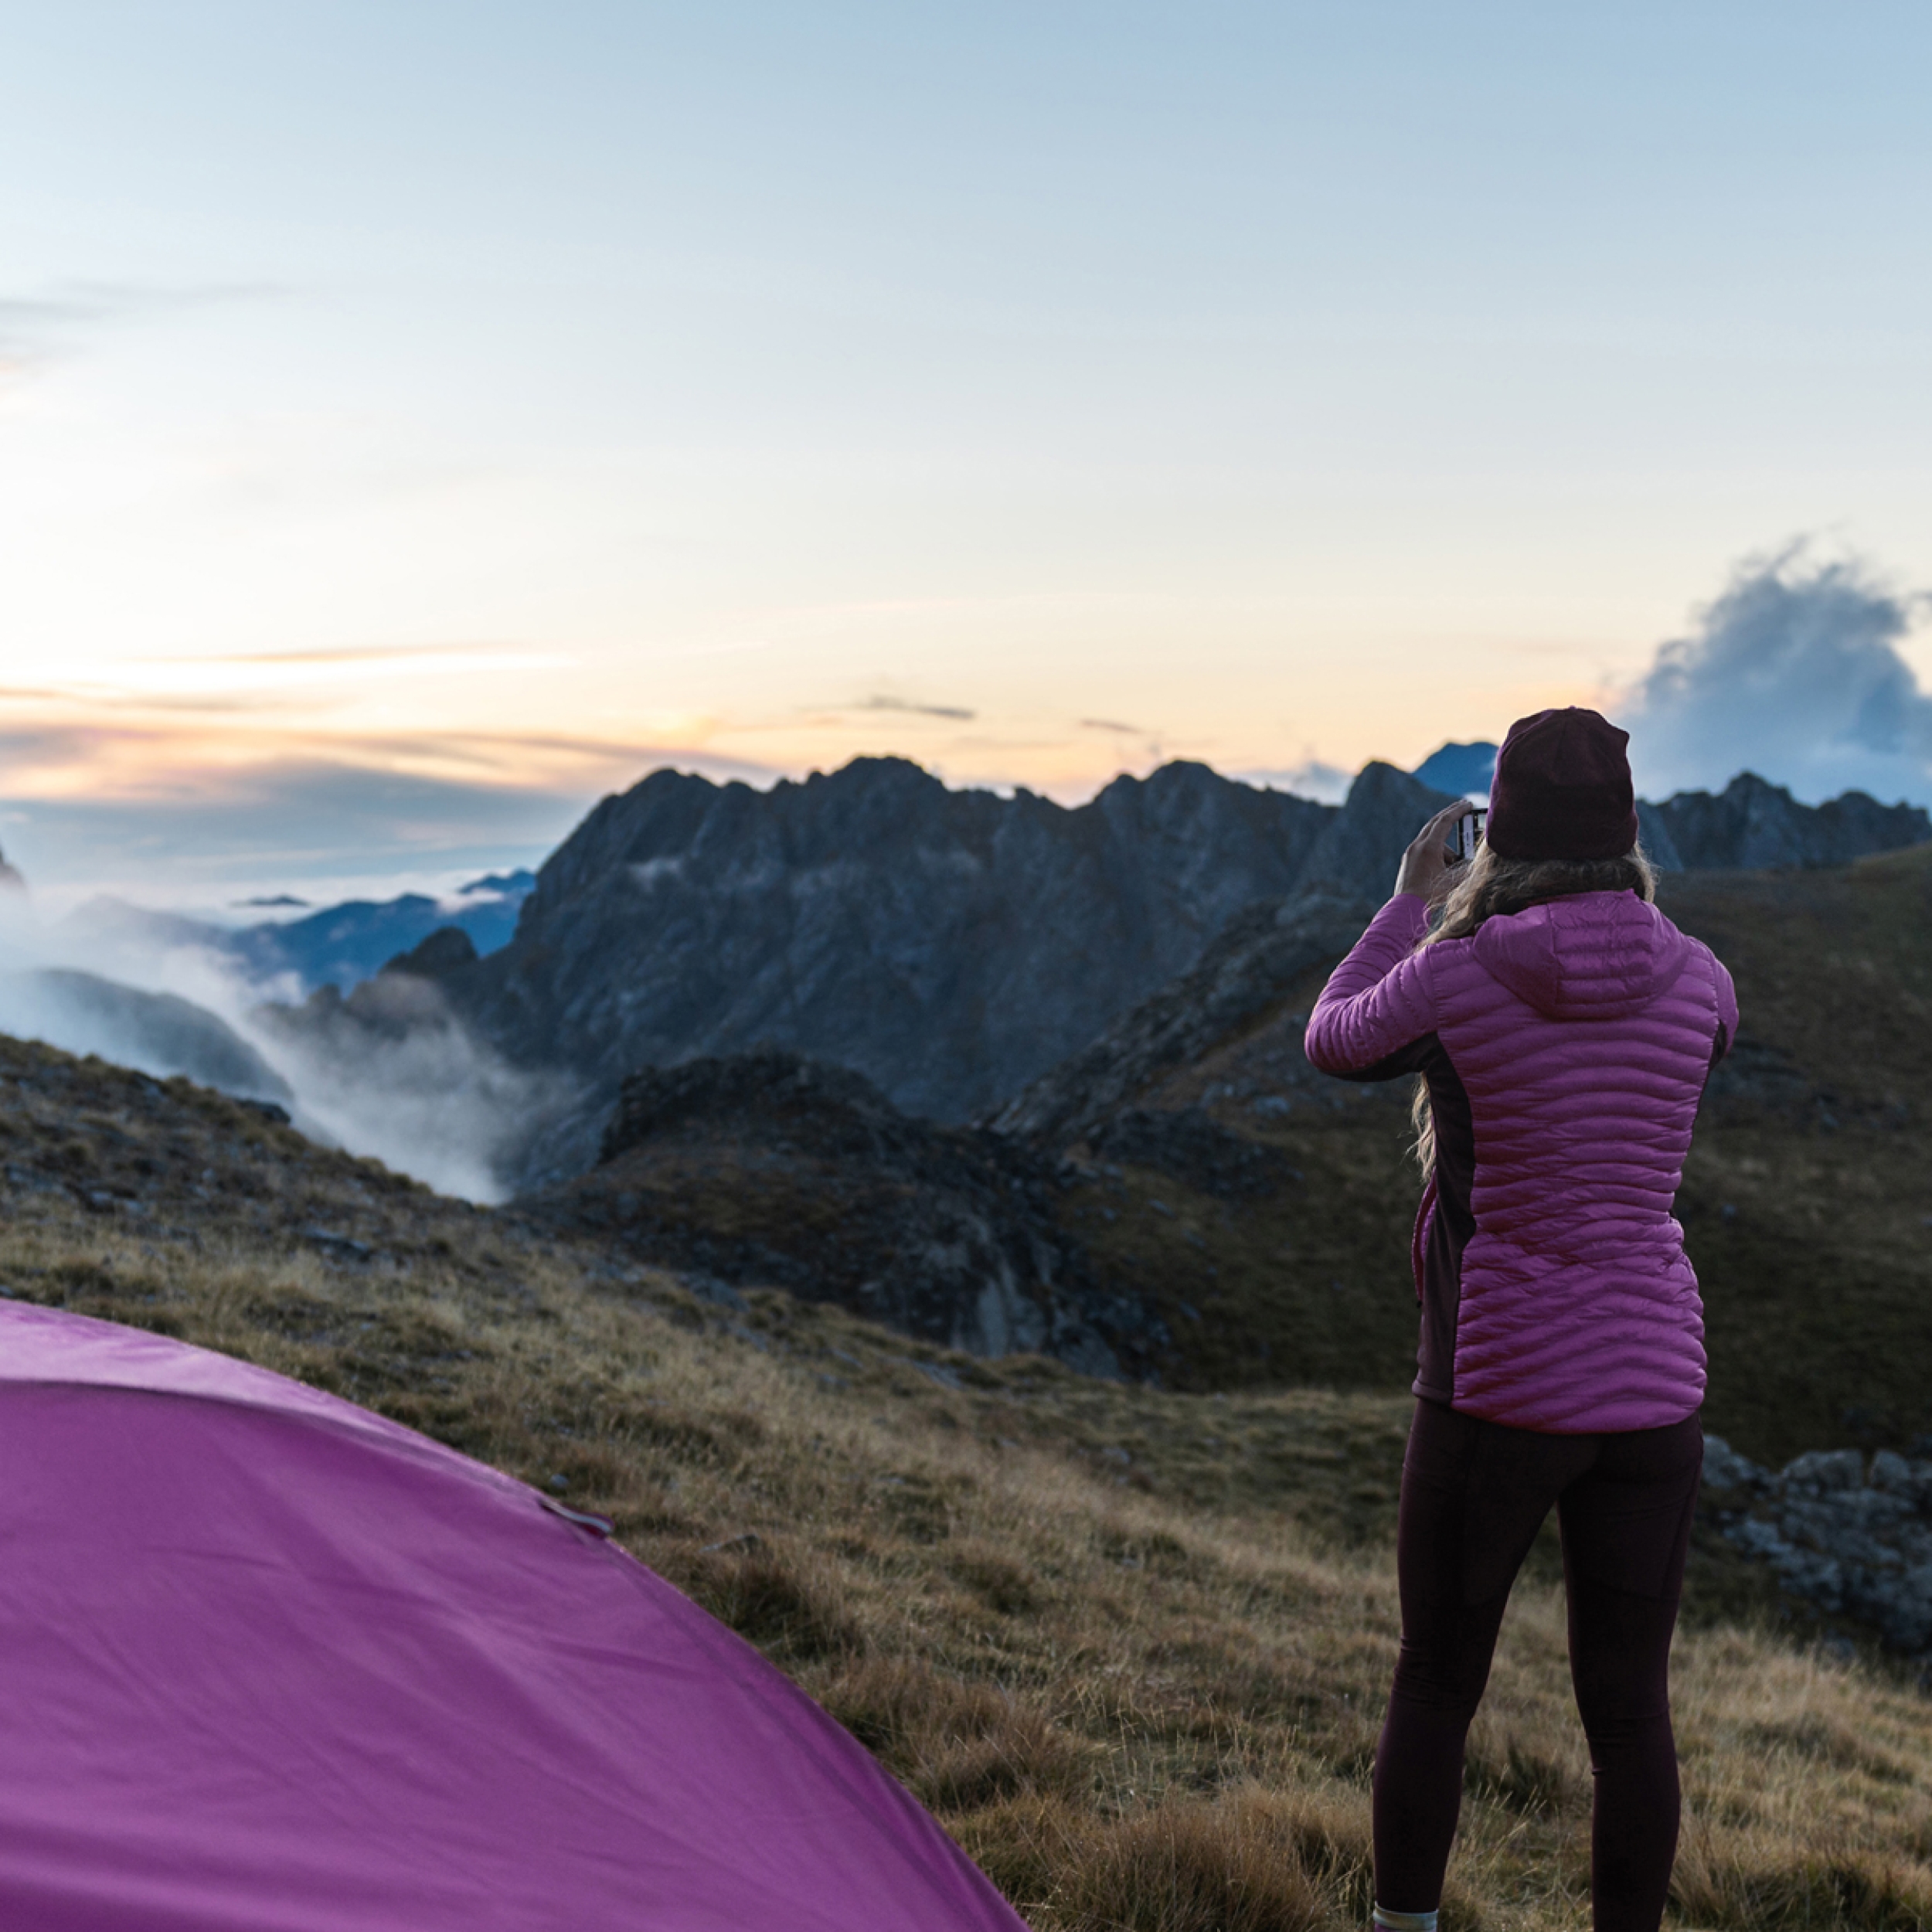 A woman is seen from the back wearing pink coloured hiking gear. She is taking a photo of the landscape with mountains and clouds in front of her. A pink coloured tent is seen in the corner of the photo.